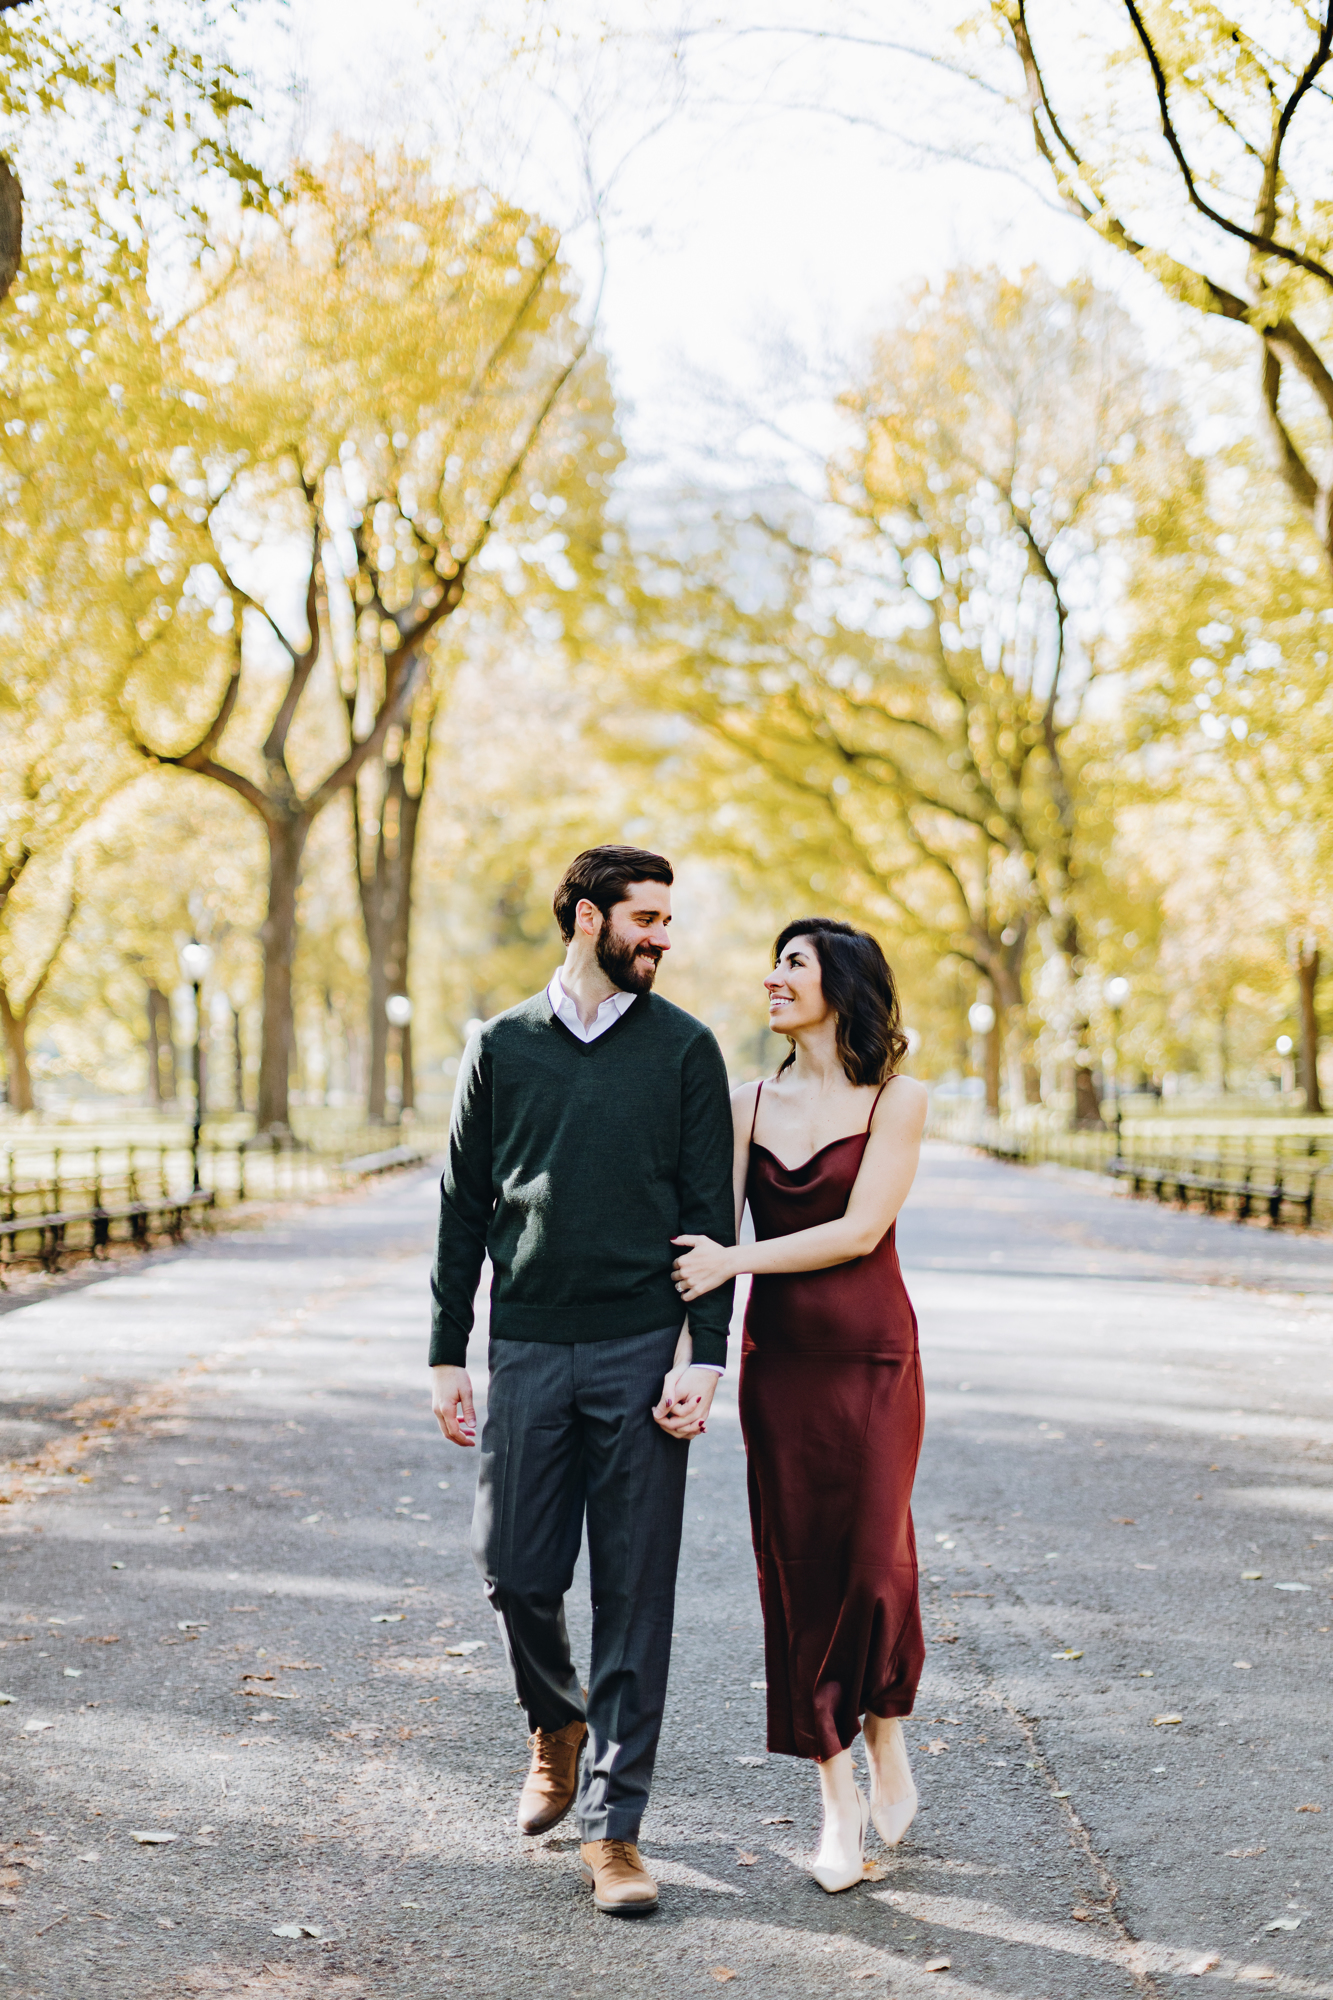 Beautiful Central Park Engagement Photos in Fall